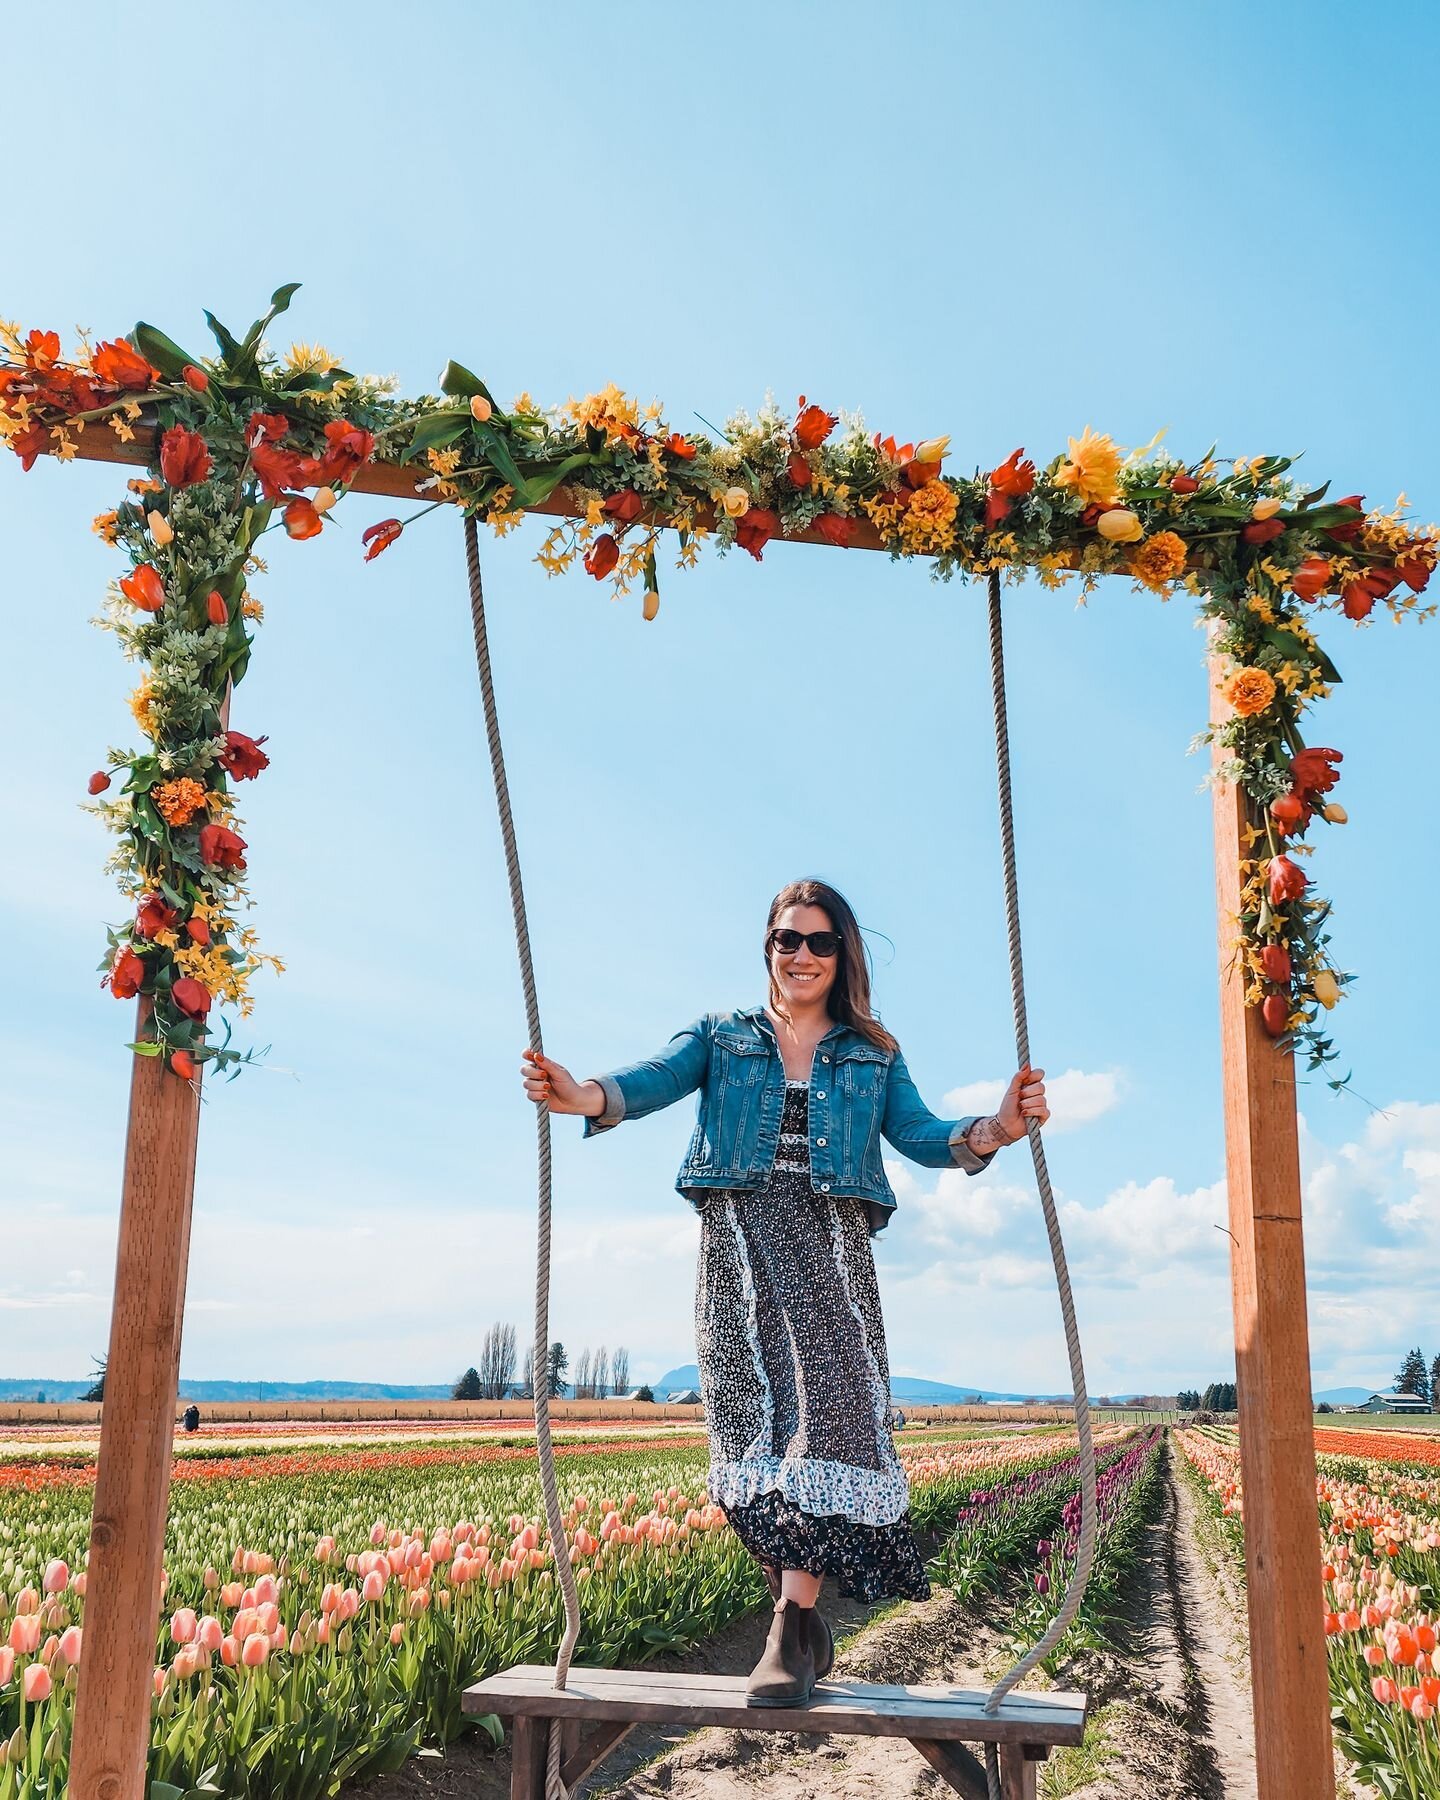 🌷Want to see the tulip fields in the Netherlands but want a more affordable option? Visit Washington State instead! 
The Skagit Valley Tulip Festival in Washington is a must-visit! Here, you'll find fields ablaze with countless tulips, painting the 